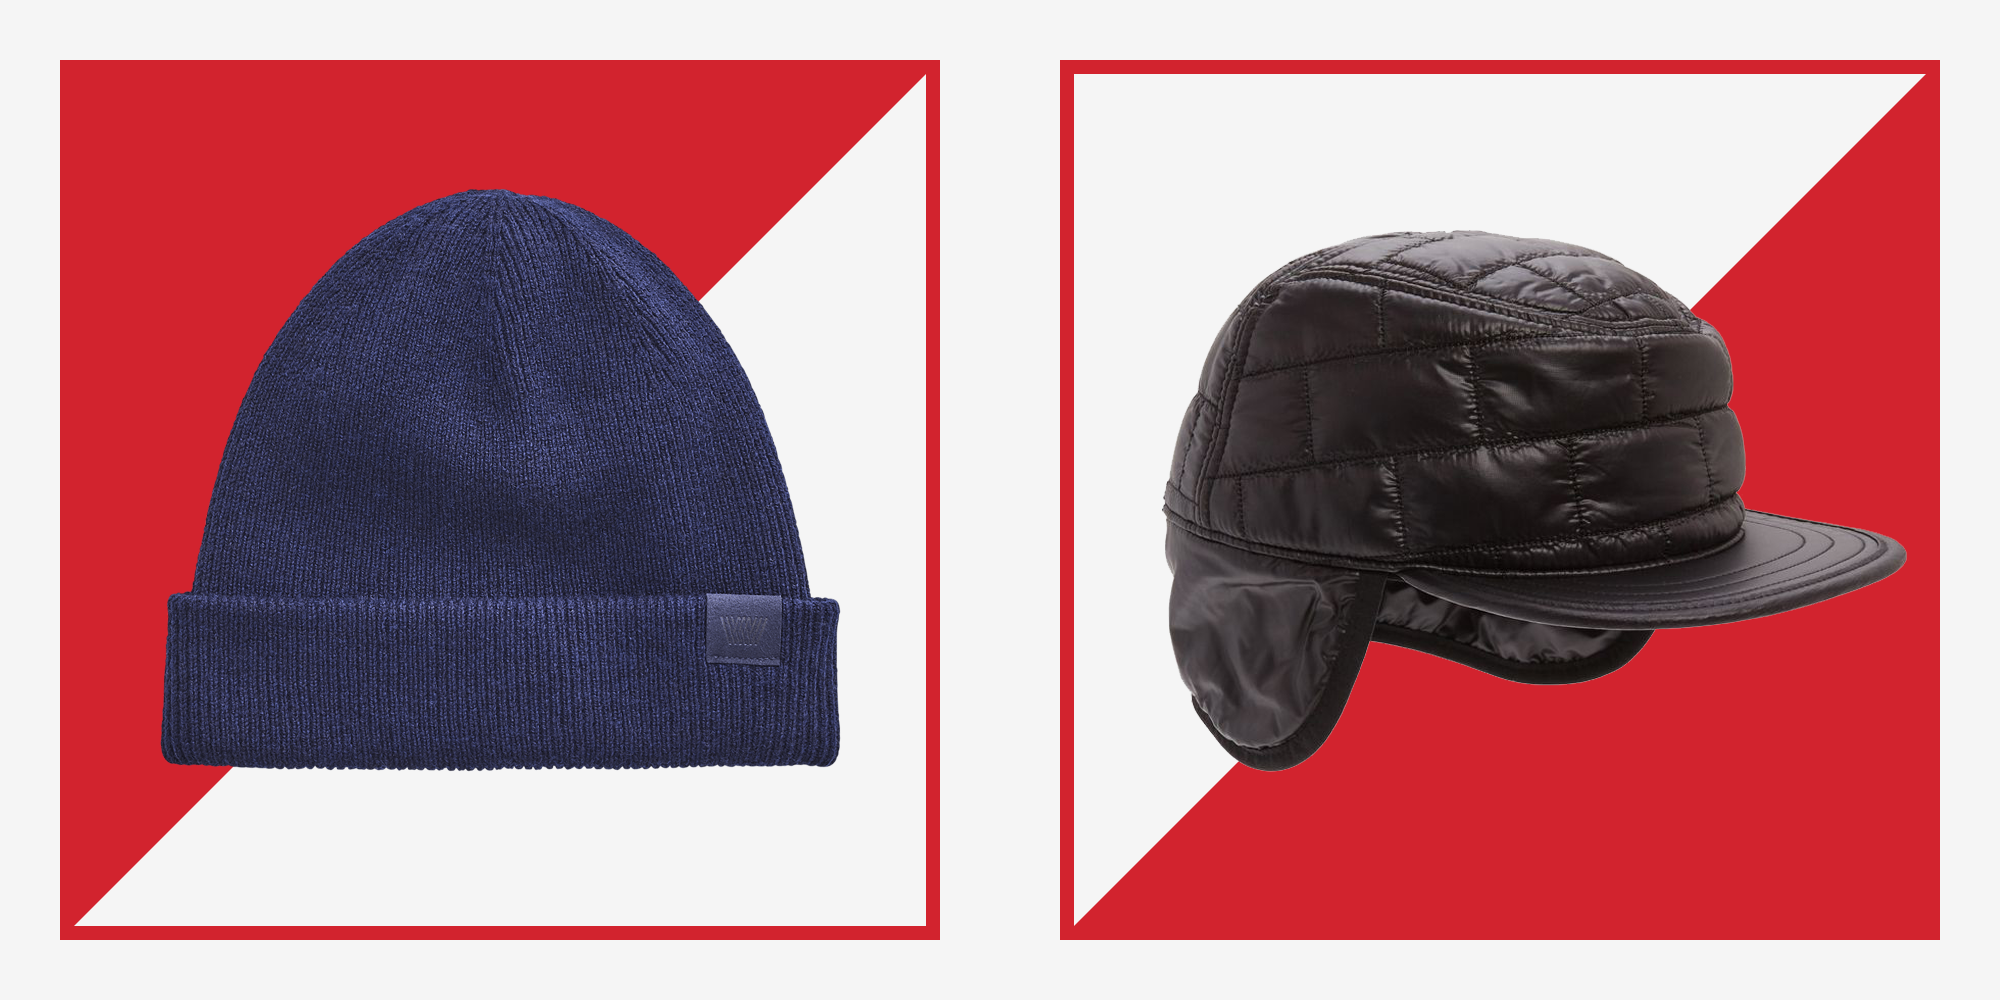 18 Best Winter Hats for Men 2021 - Warmest Beanies and Caps